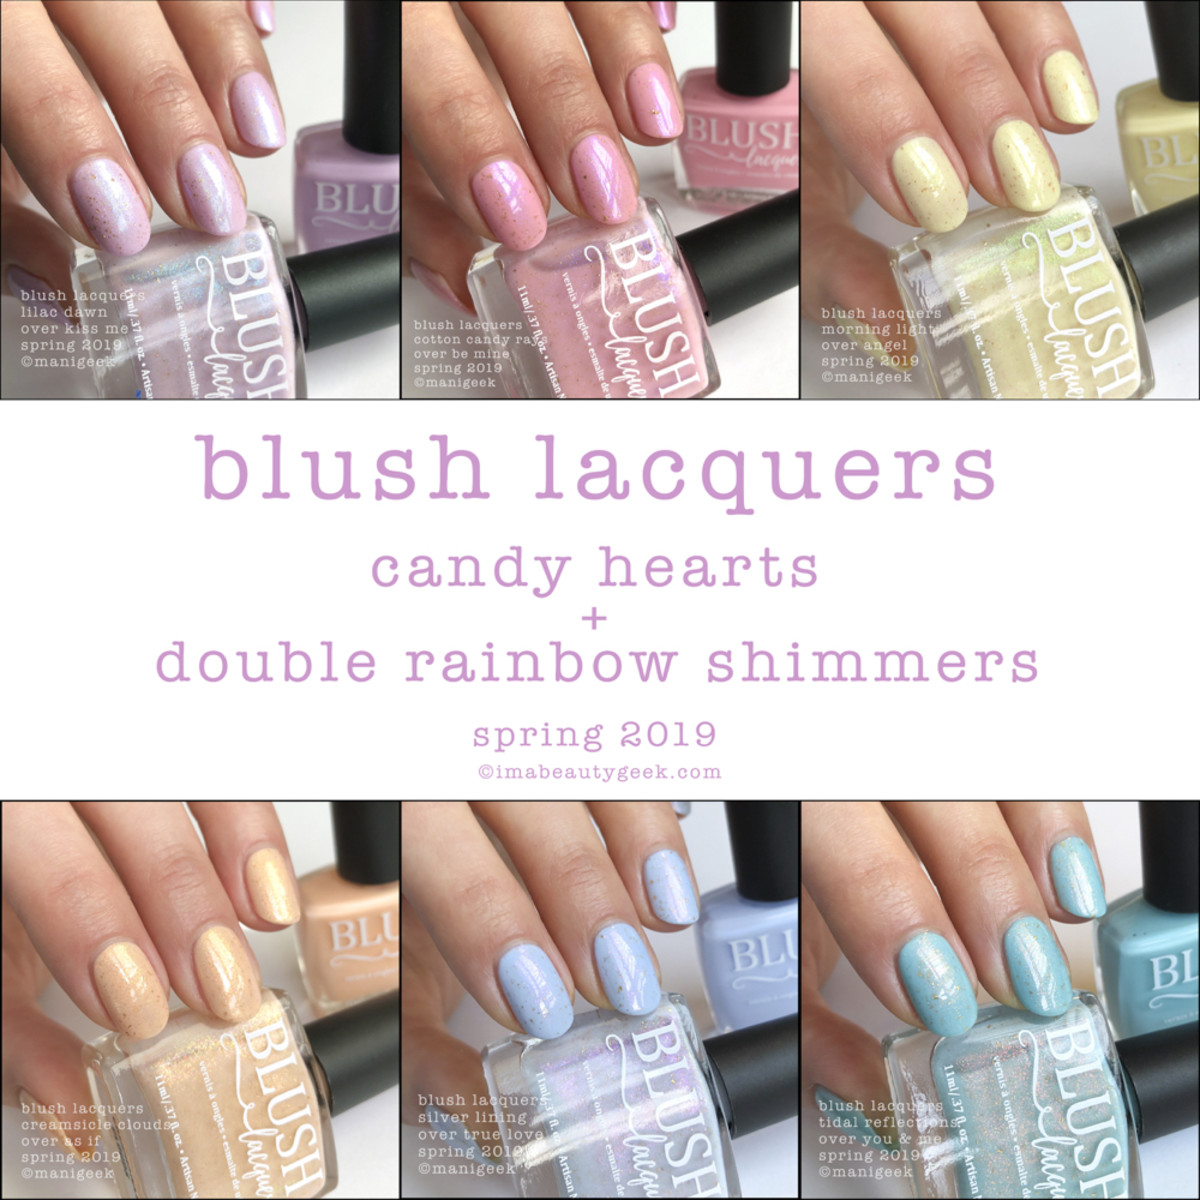 Blush Lacquers Candy Hearts + Double Rainbow Shimmers Collection Composite Beautygeeks